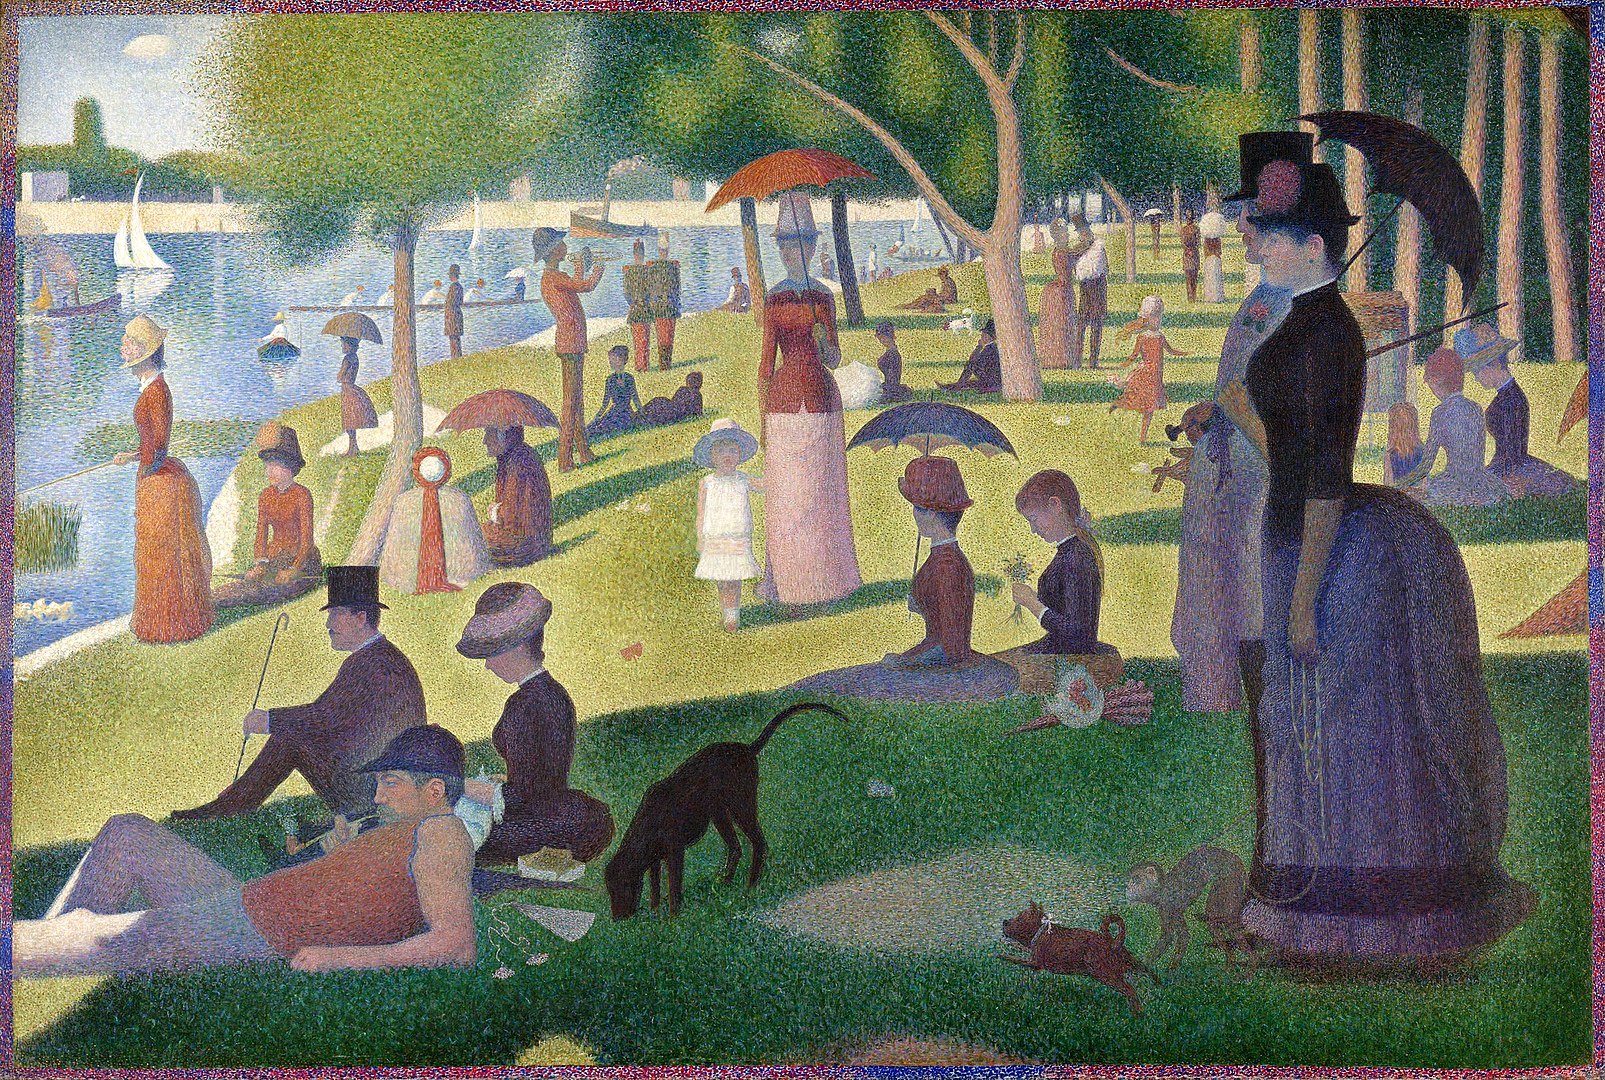 A Sunday Afternoon on the Island of La Grande Jatte" by Georges Seurat (1884-1886)